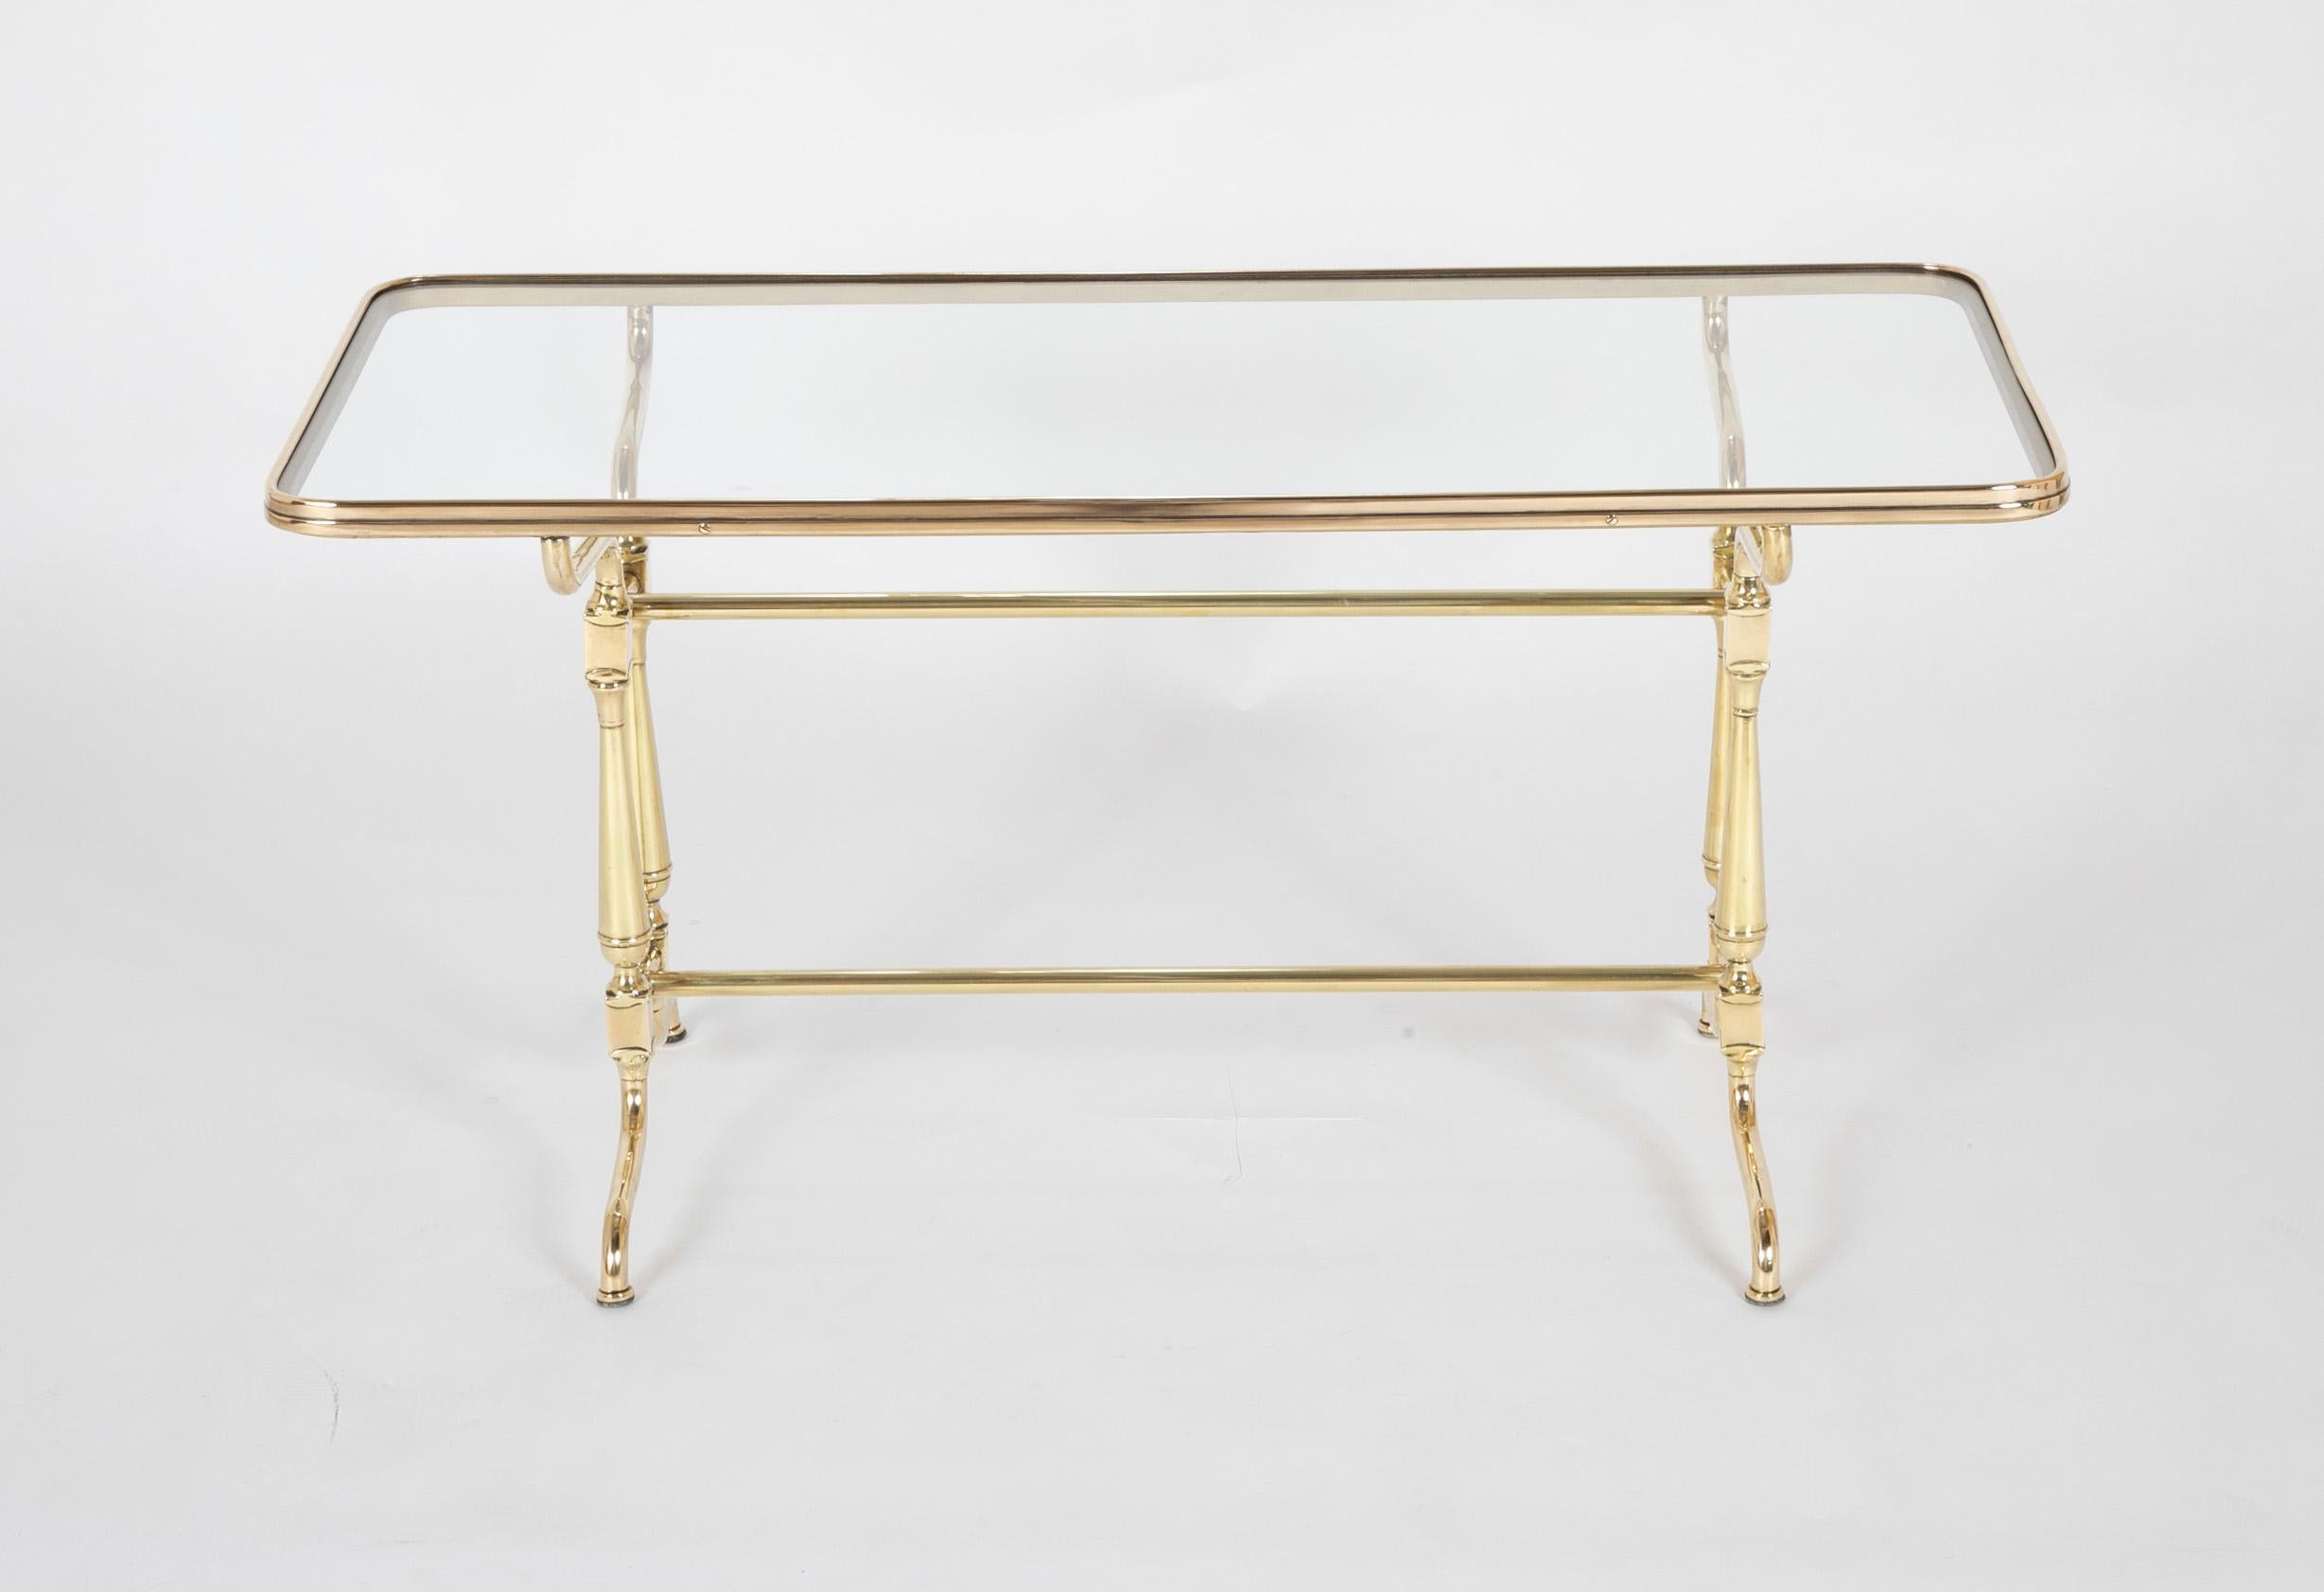 Early 20th Century French Glass Top Brass Coffee Table In Good Condition For Sale In Stamford, CT